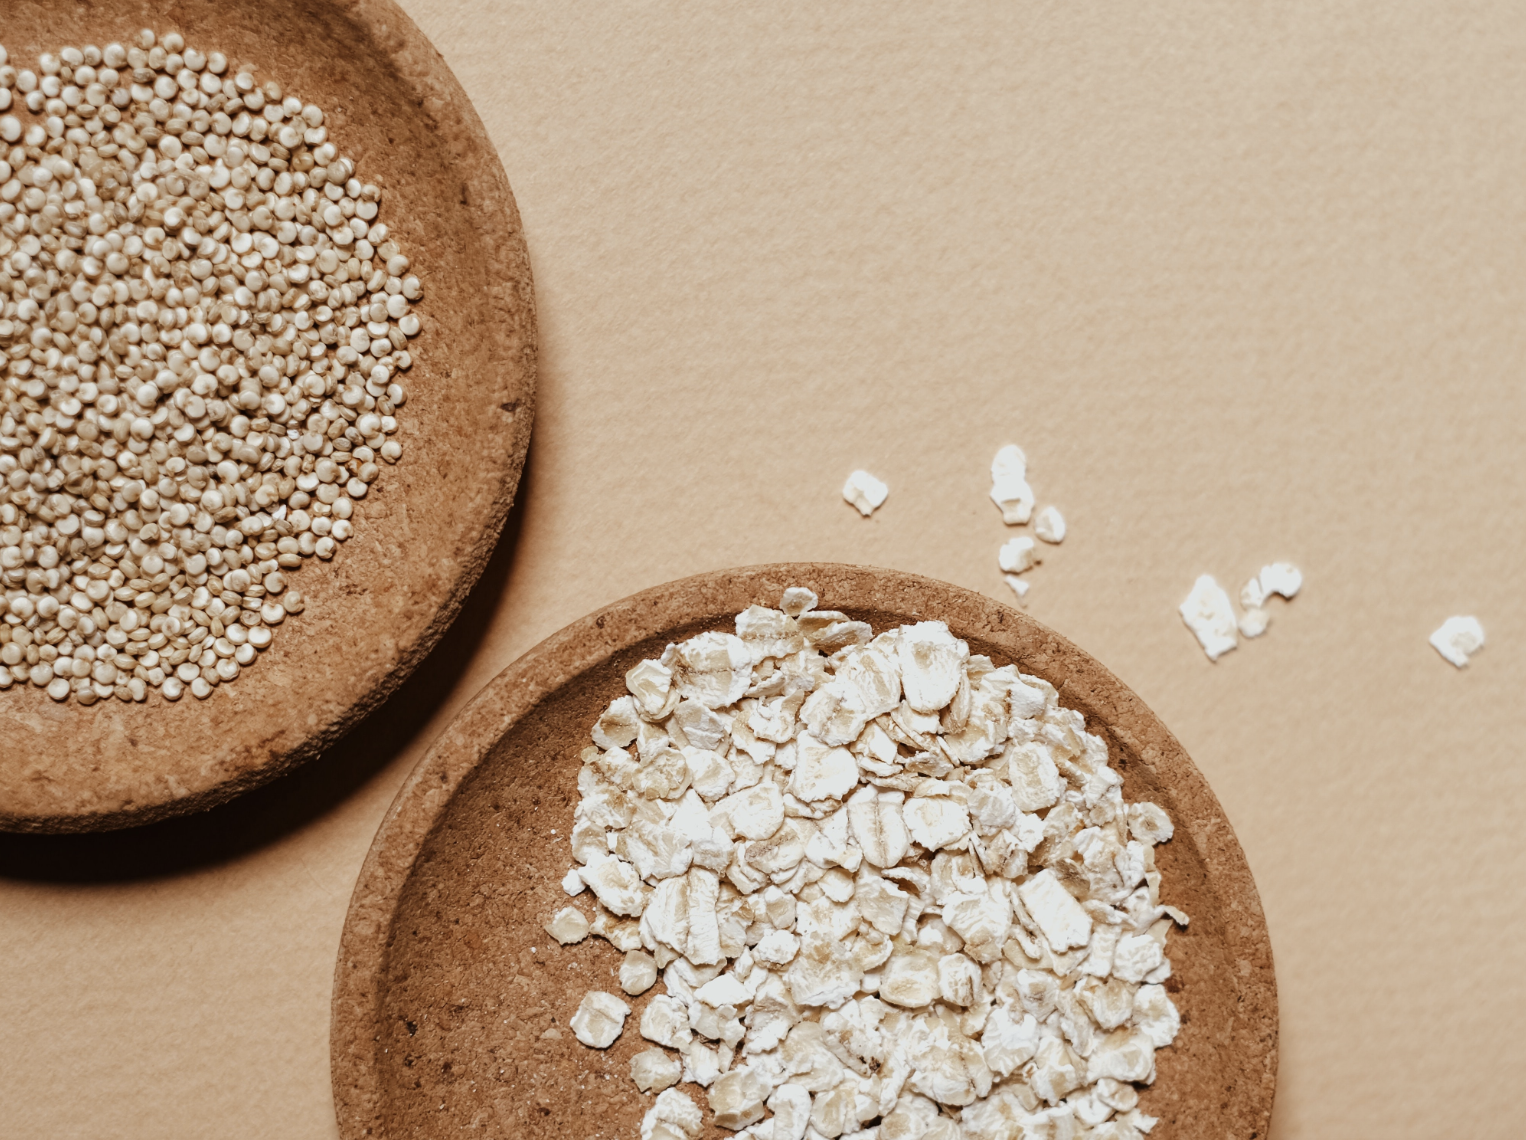 Oats and grains.